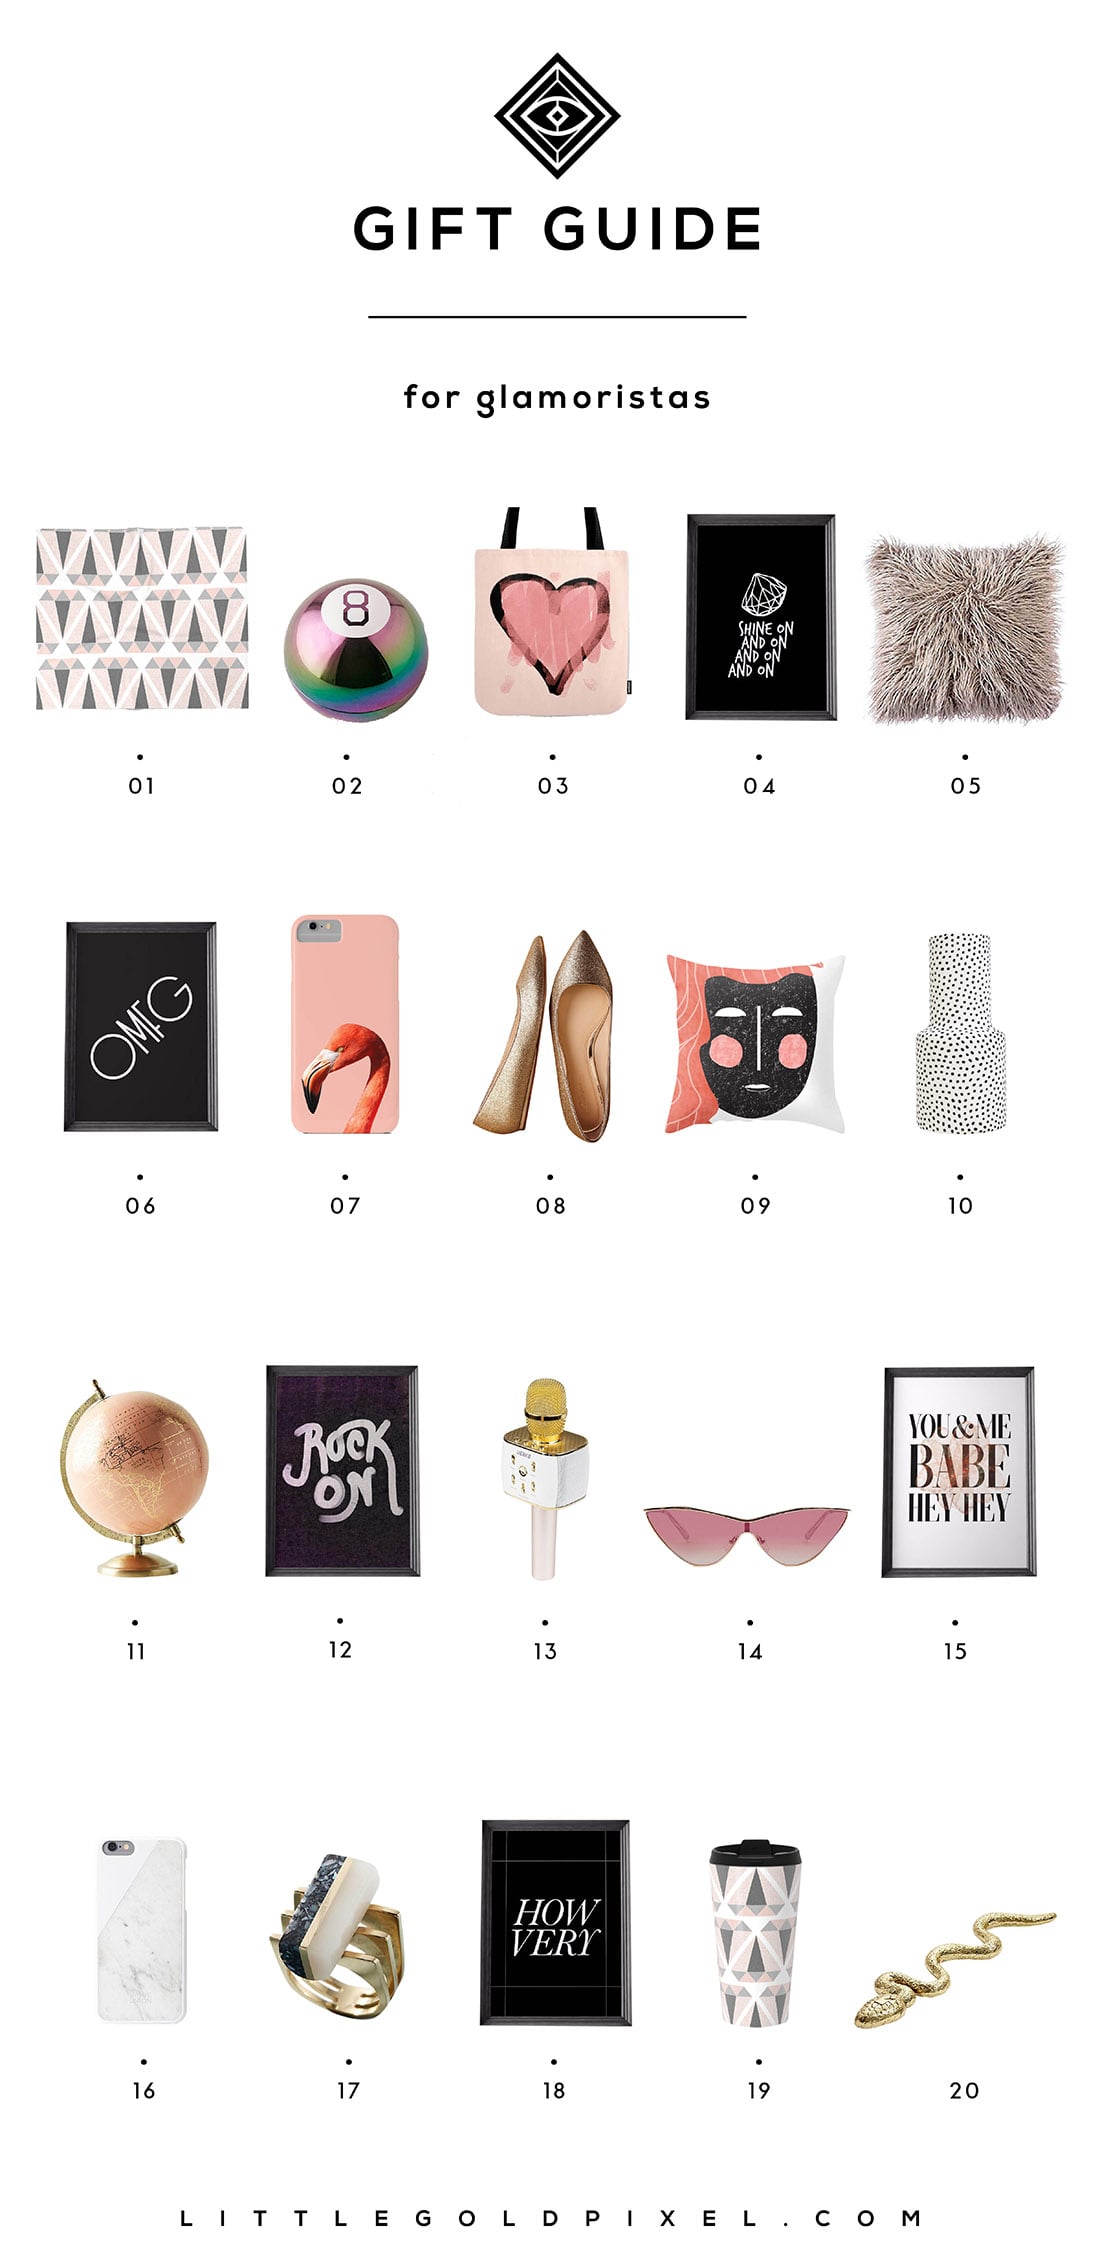 Little Gold Pixel's Modern Glam Gift Guide: Here are 20 gifts perfect for the edgy, sassy women in your life. Grab one for yourself while you're at it!